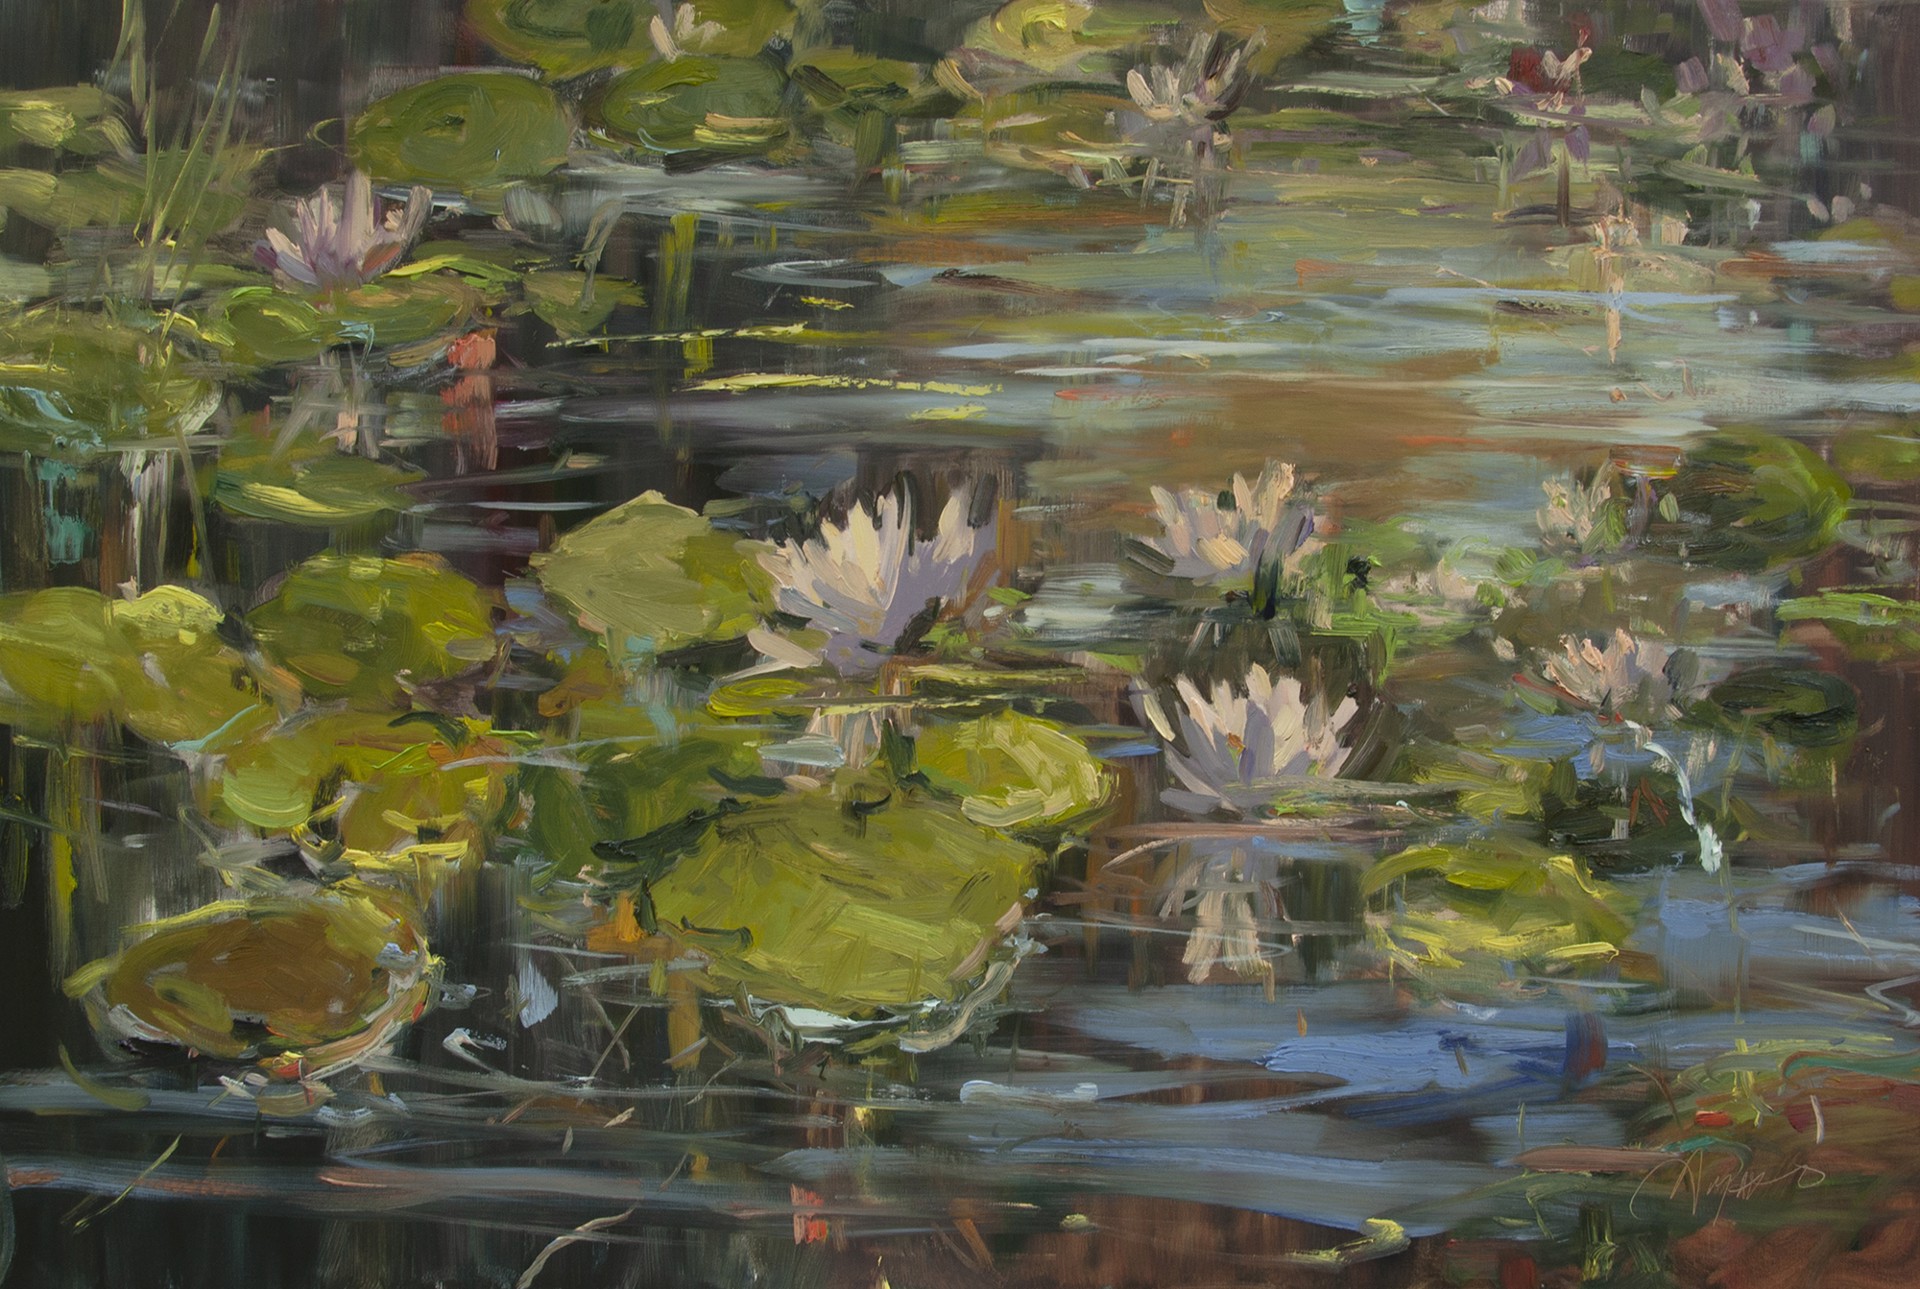 Waterlilies in the Summer Sun by Stephanie Amato